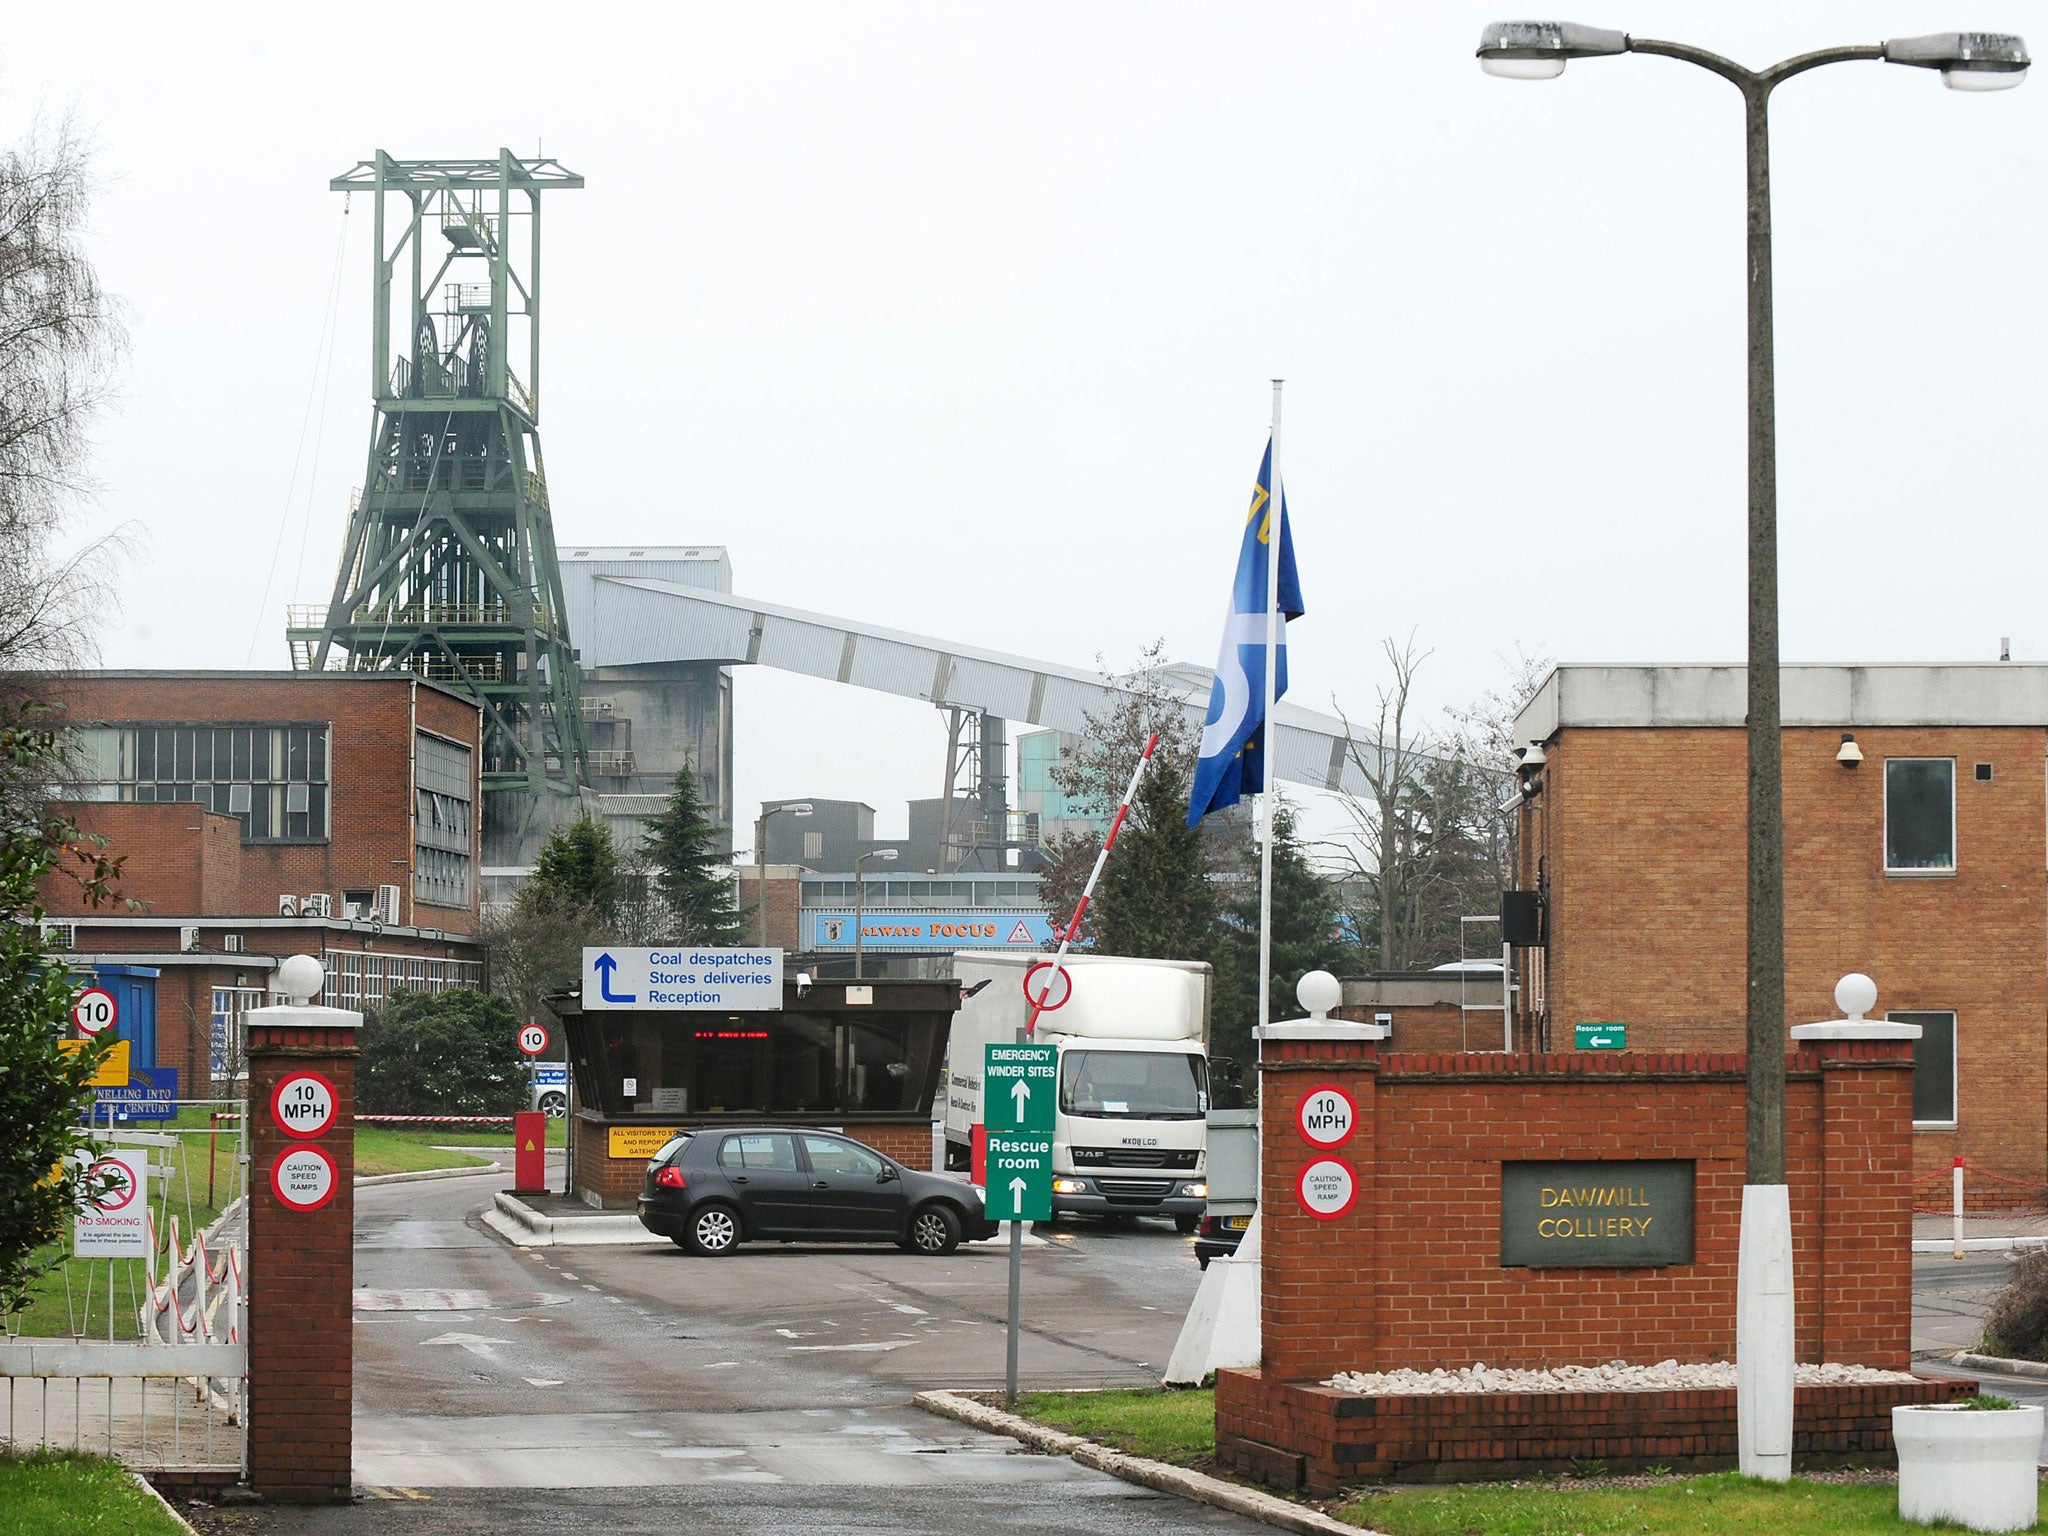 The decision to close Daw Mill Colliery in north Warwickshire follows a major fire last month